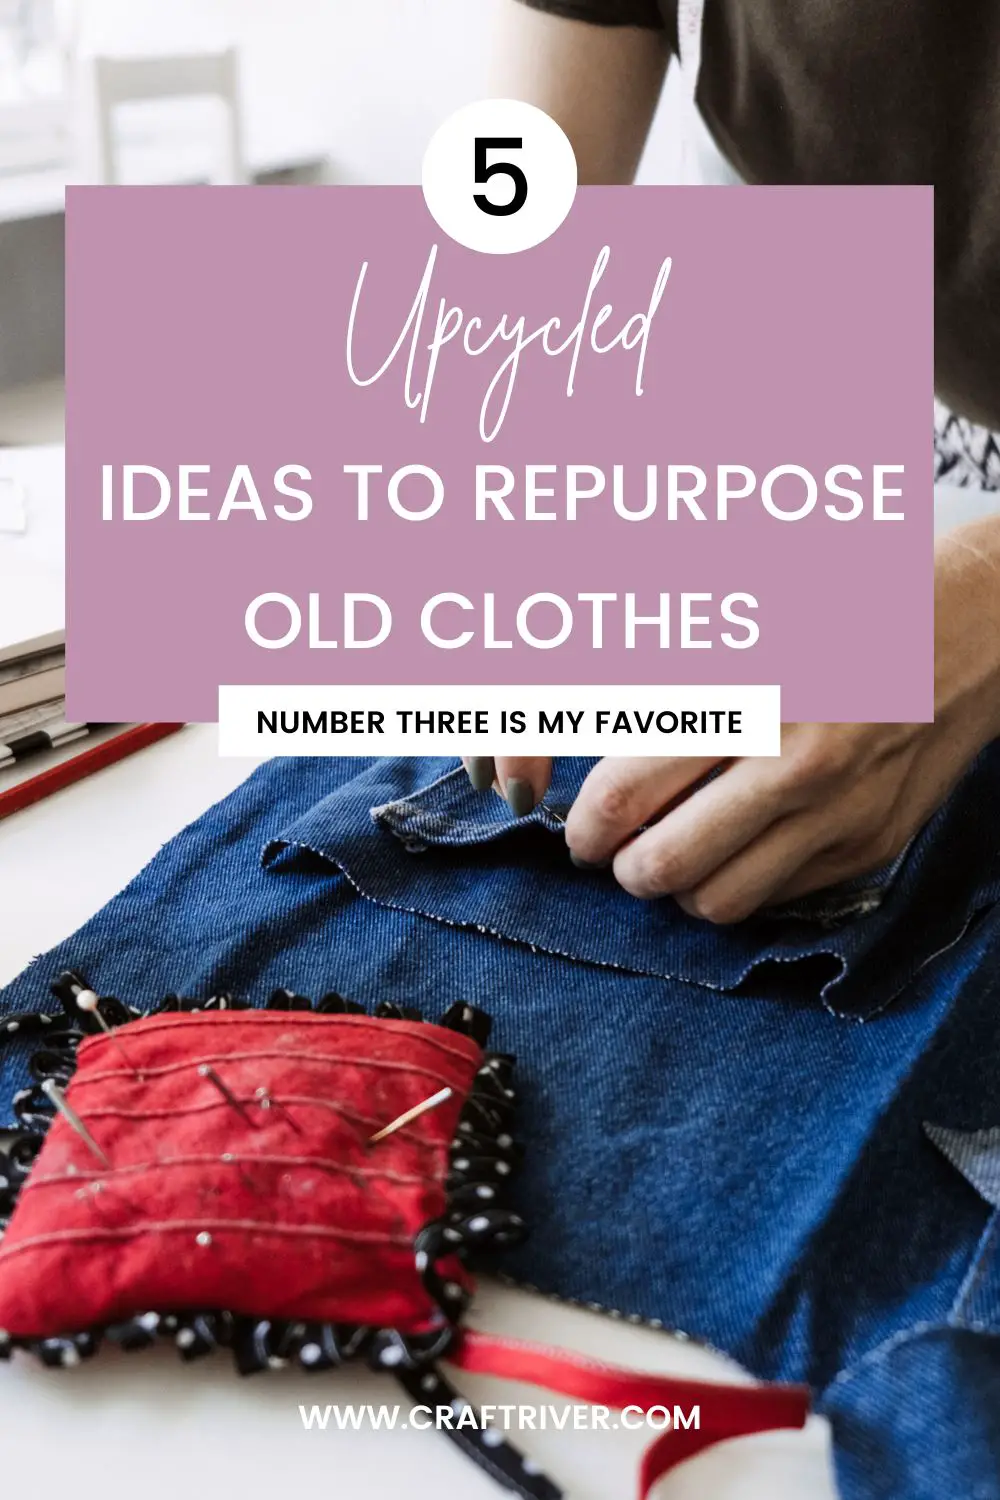 Upcycled Ideas and to Repurpose Old Clothes